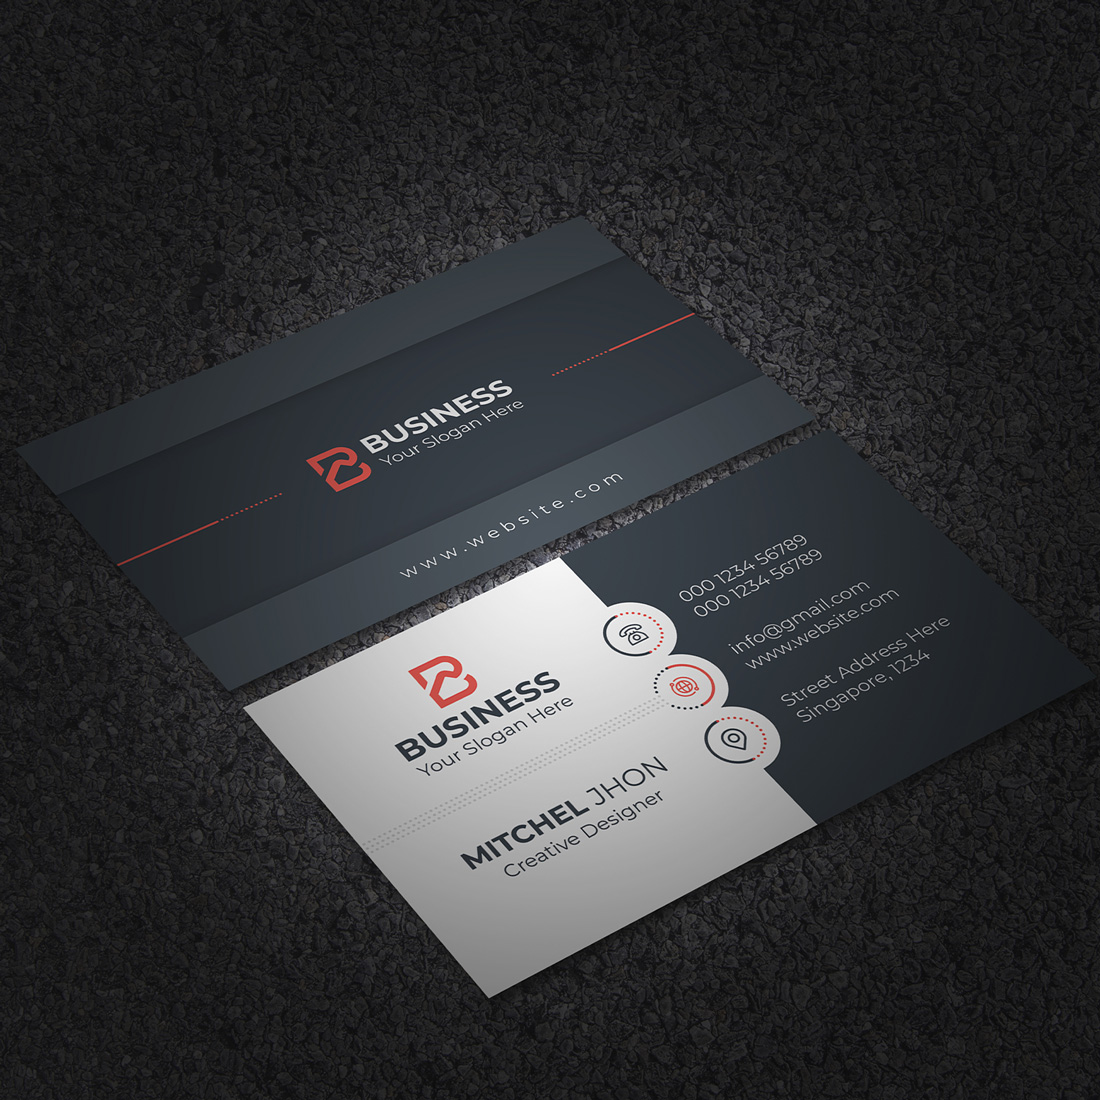 Business Card Template Only $6 in the dark with red logo.